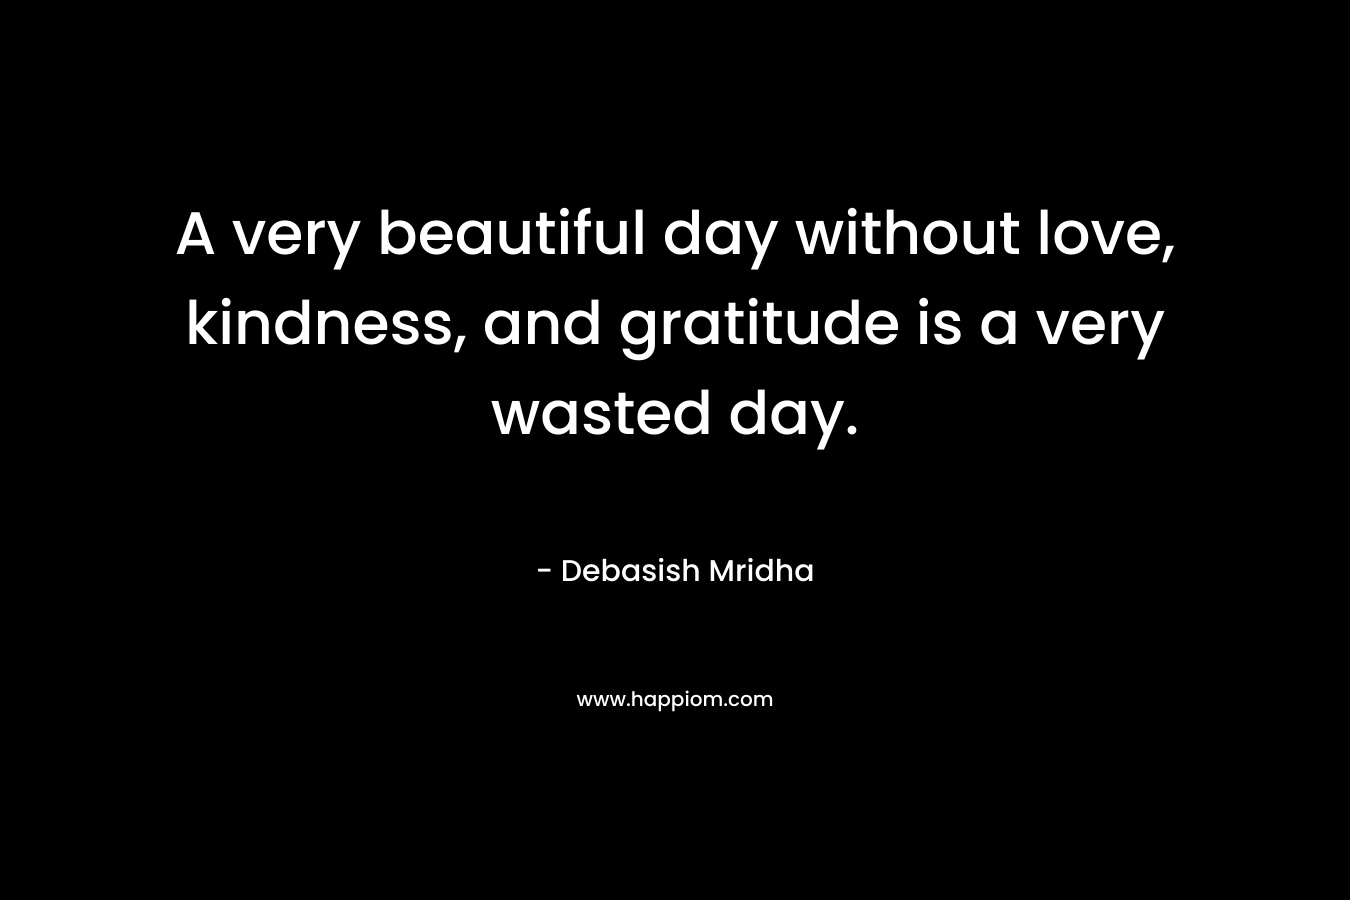 A very beautiful day without love, kindness, and gratitude is a very wasted day.